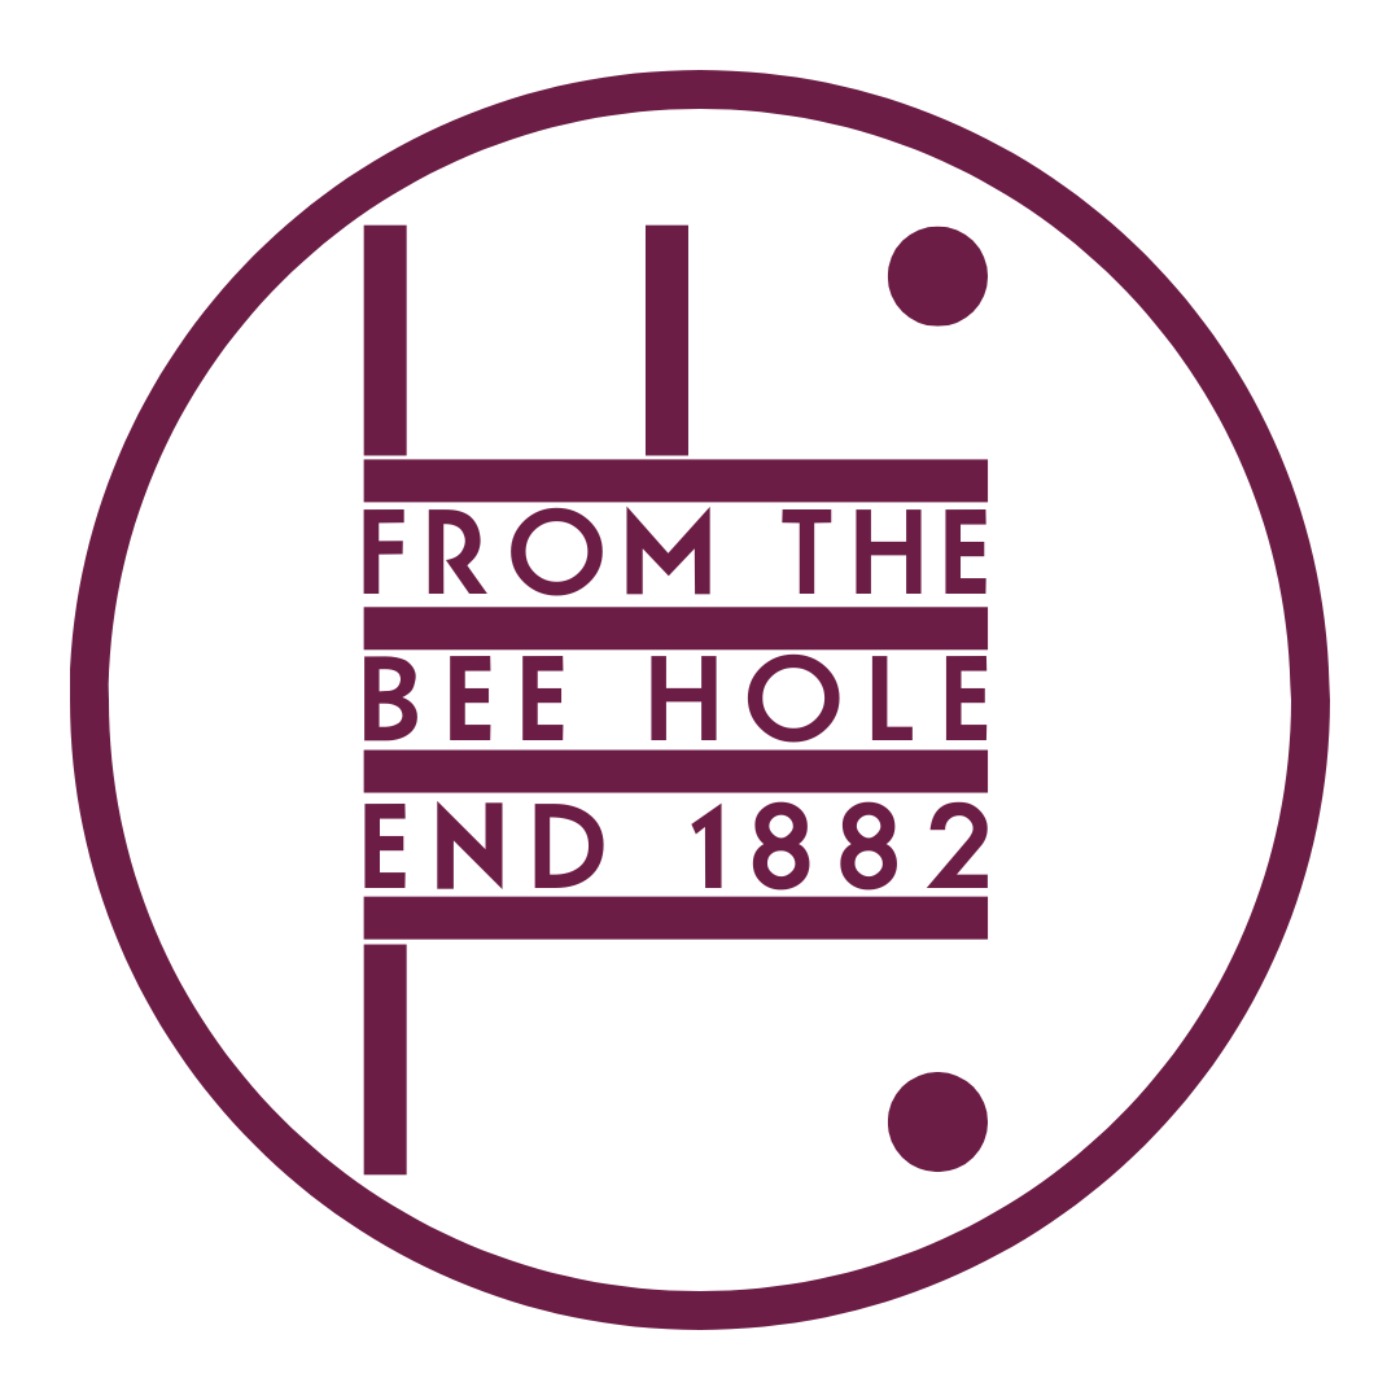 From the Bee Hole End - The Debrief - Brighton and Hove Albion